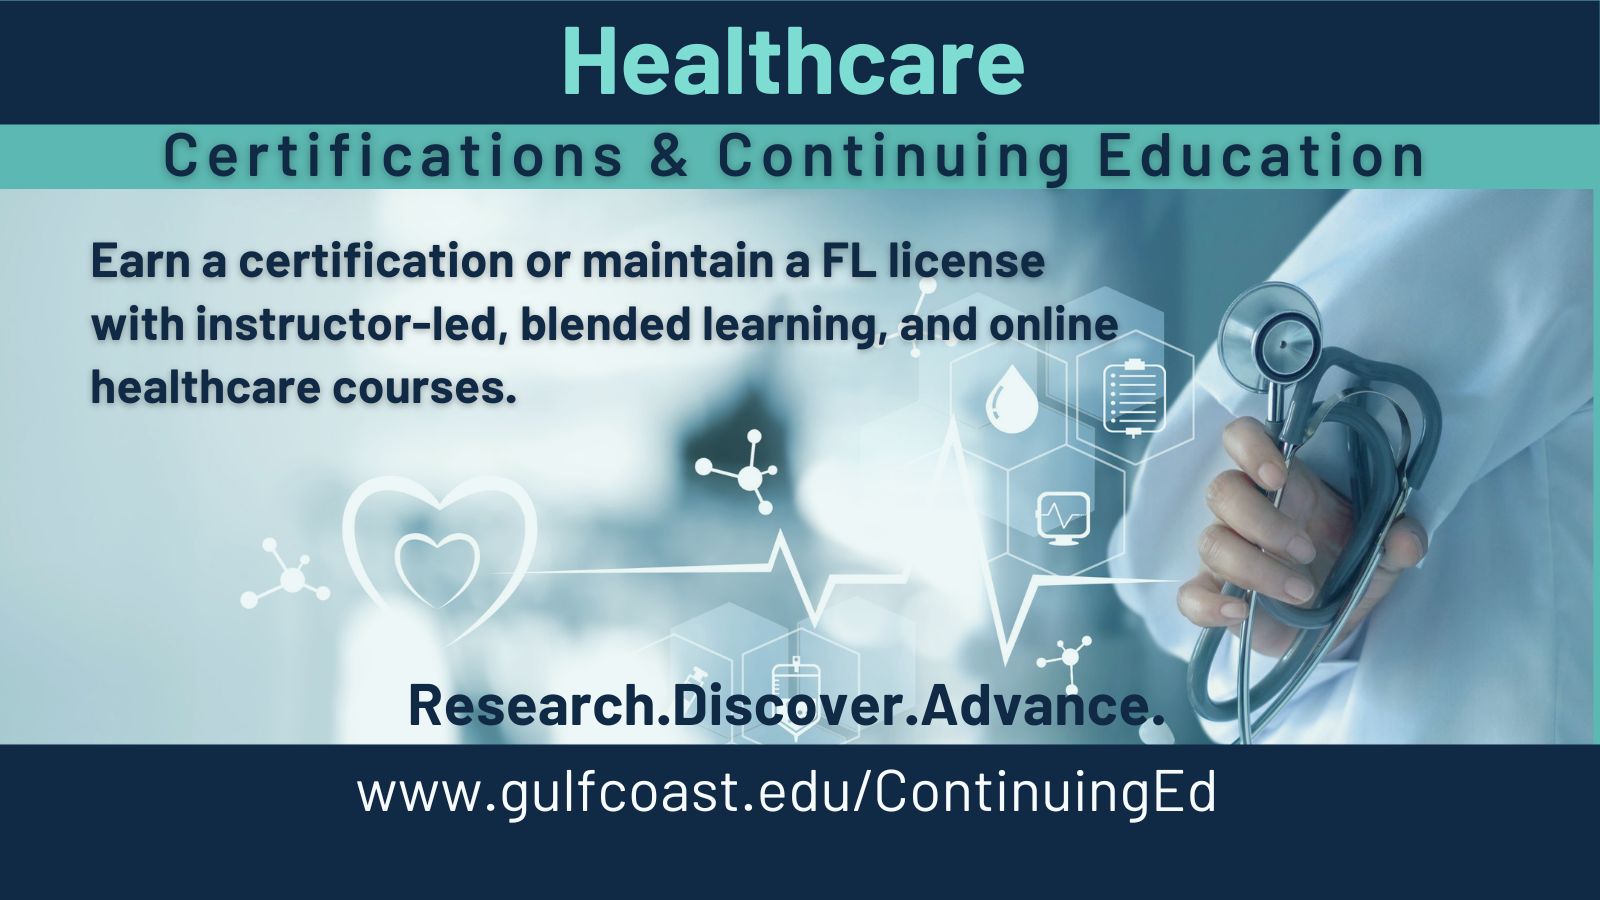 Healthcare Certifications & Continuing Education